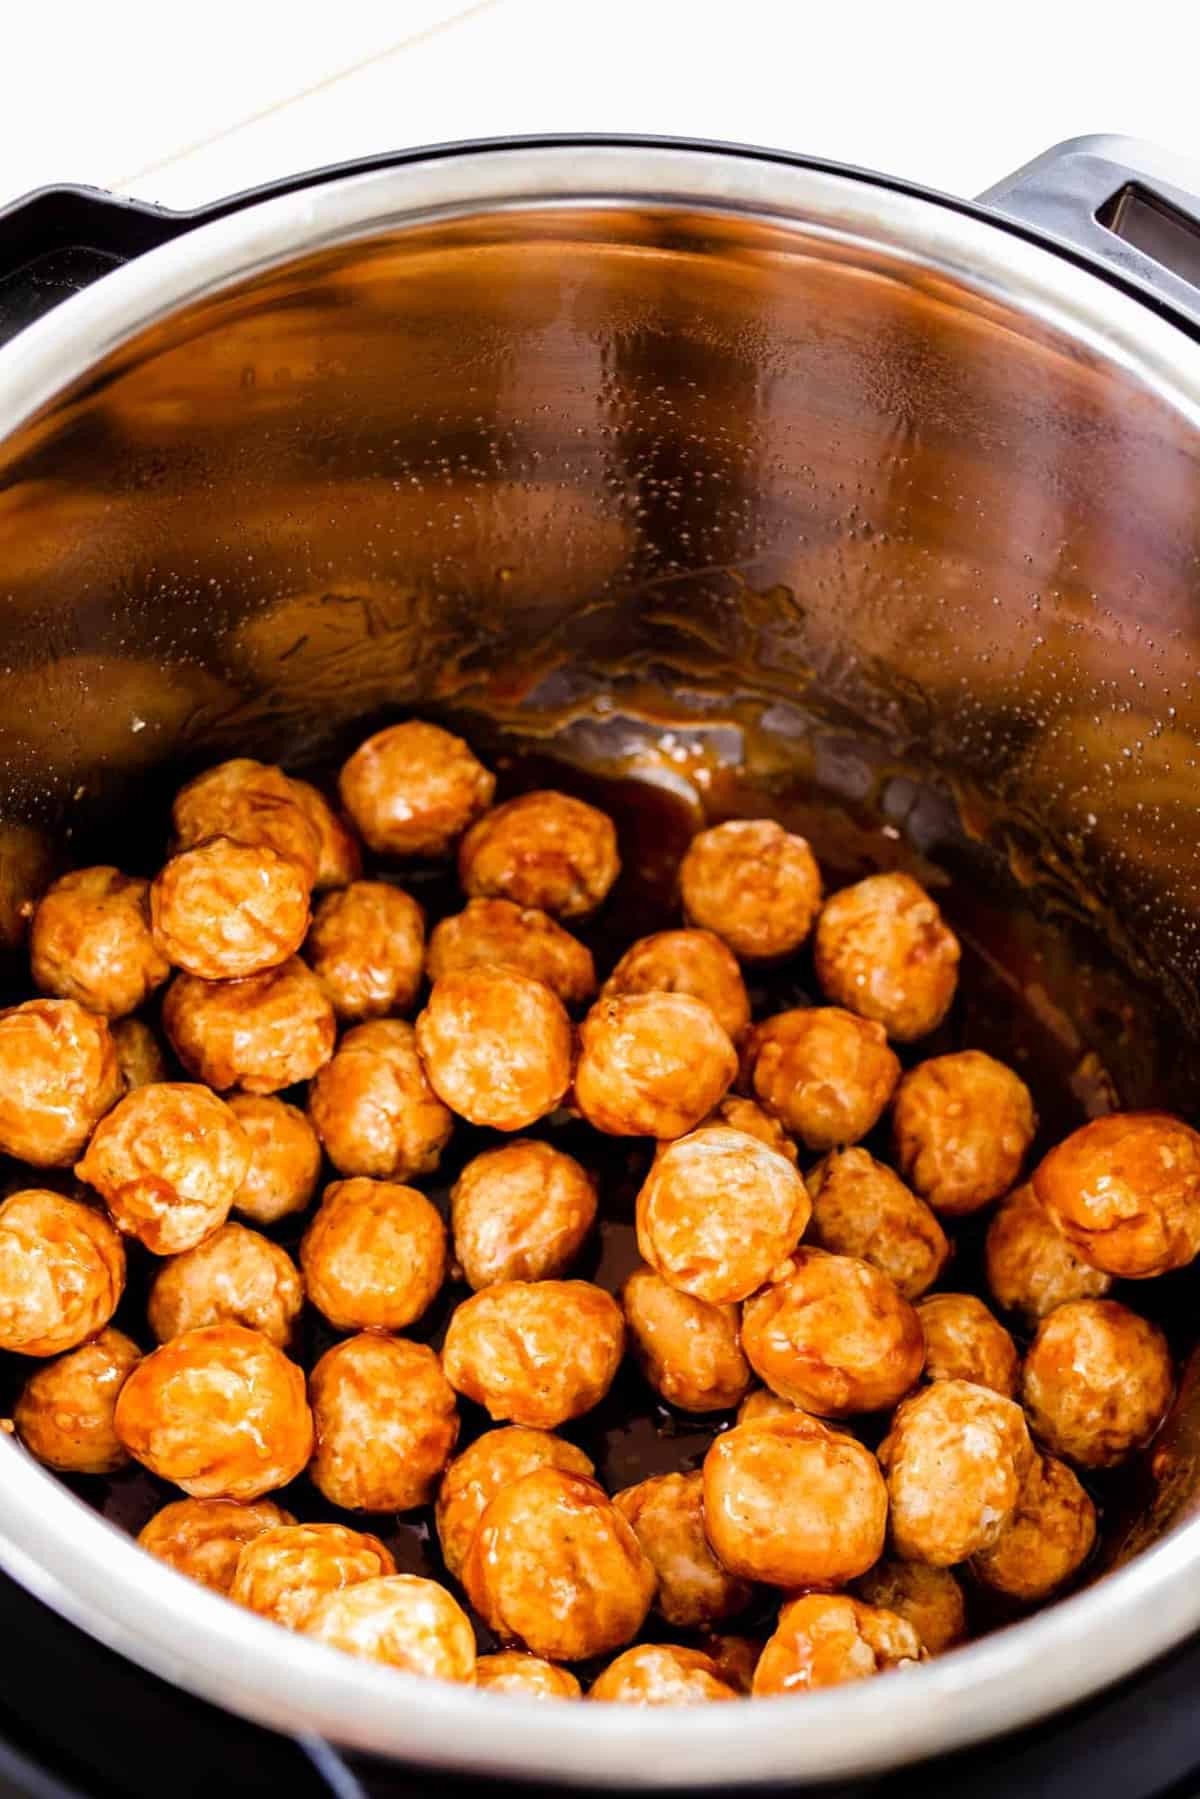 Meatballs are stirred in sauce to make sure they are covered.